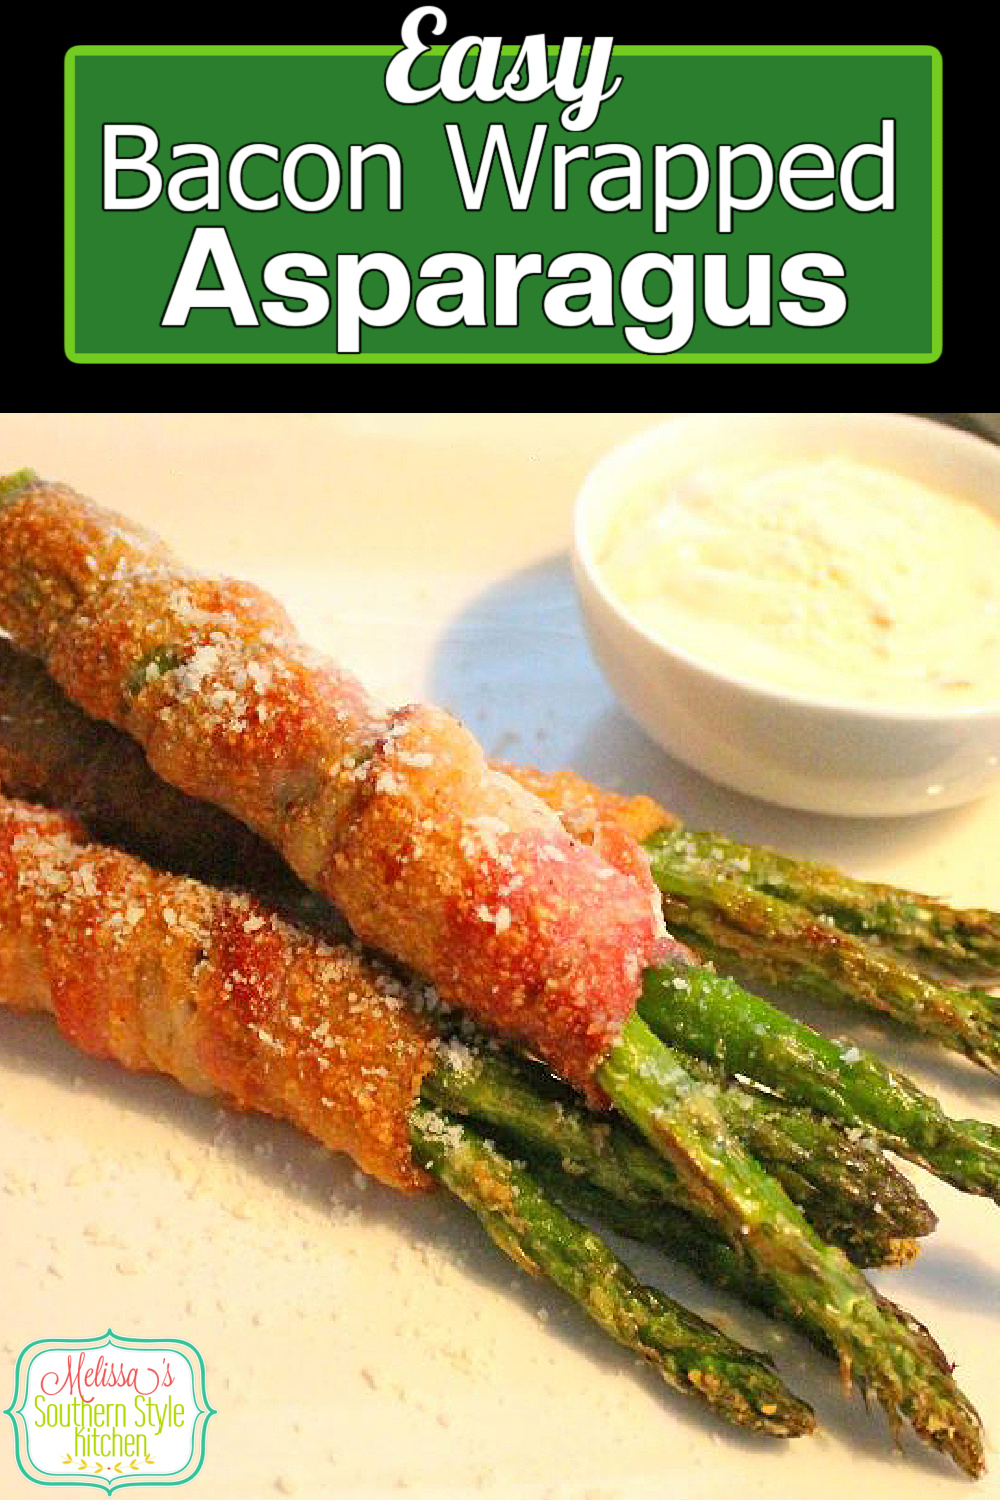 These stunning baked Bacon Wrapped Asparagus Bundles will turn any occasion into something special #bacon #baconwrappedasparagus #asparagusrecipes #sidedishrecipes #bacon #asparagus #baconrecipes #southernfood #holidaysides #southernrecipes via @melissasssk